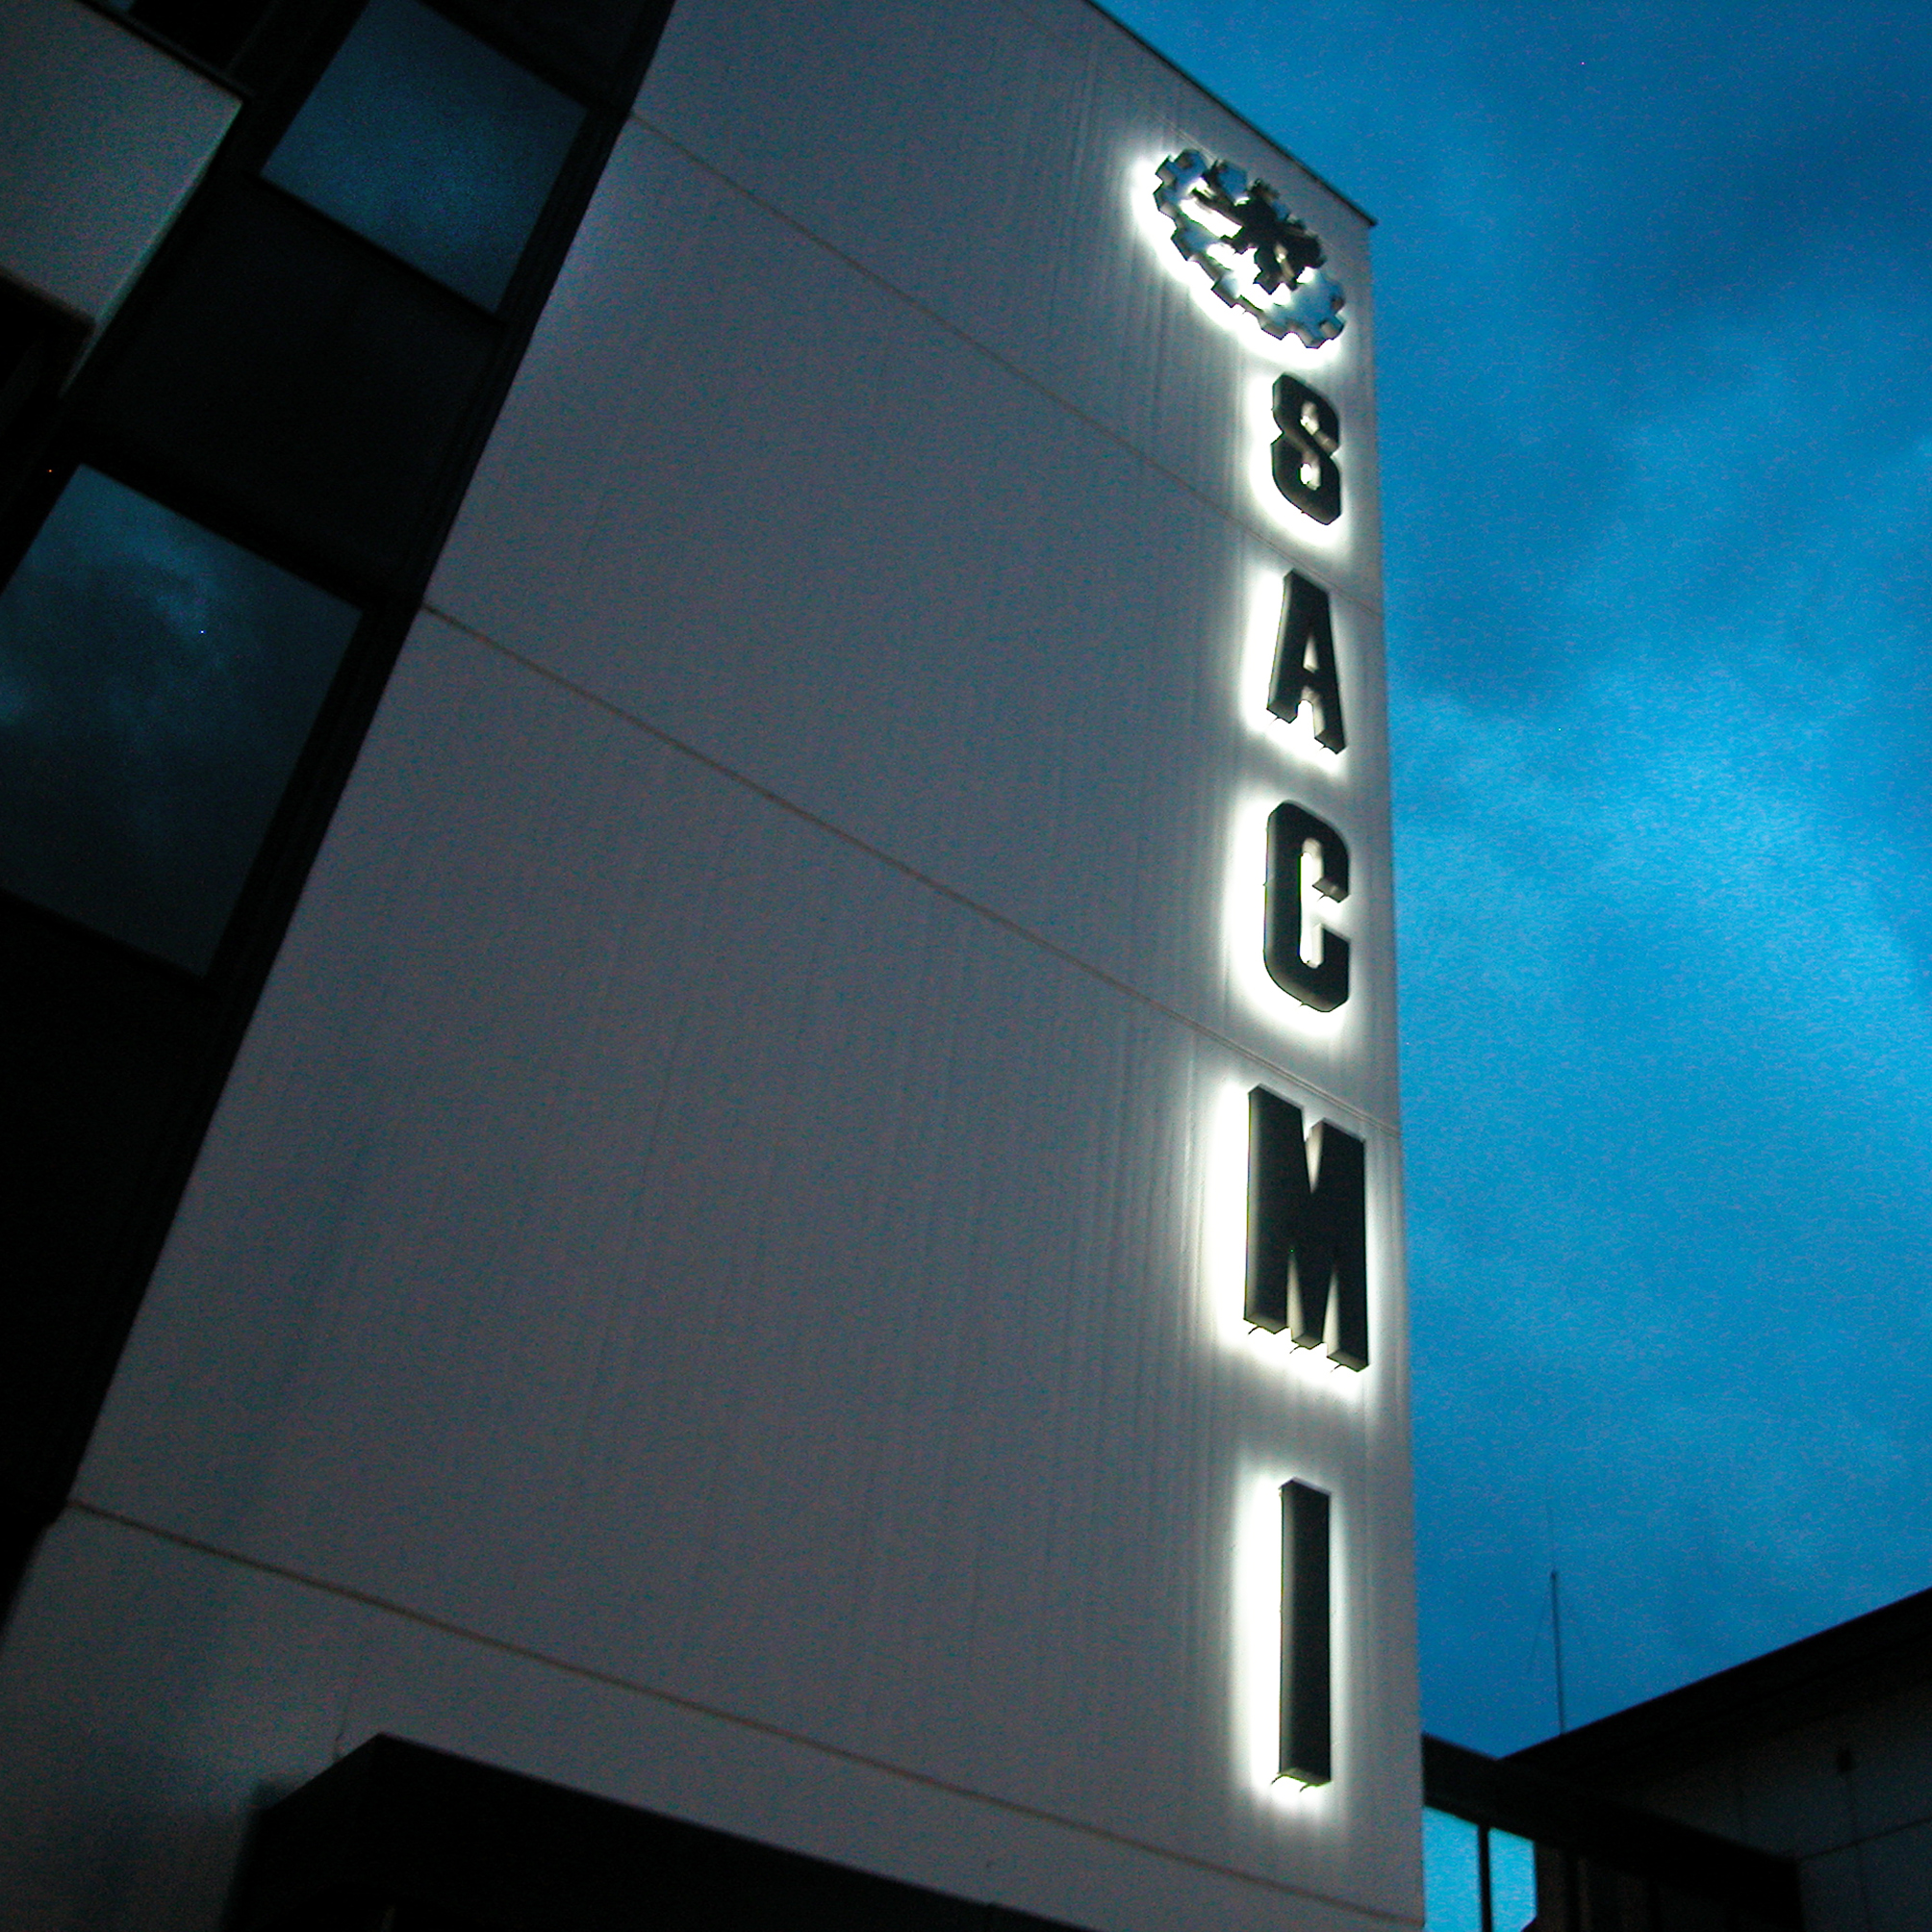 SACMI now a partner of the Massachusetts Institute of Technology (MIT)